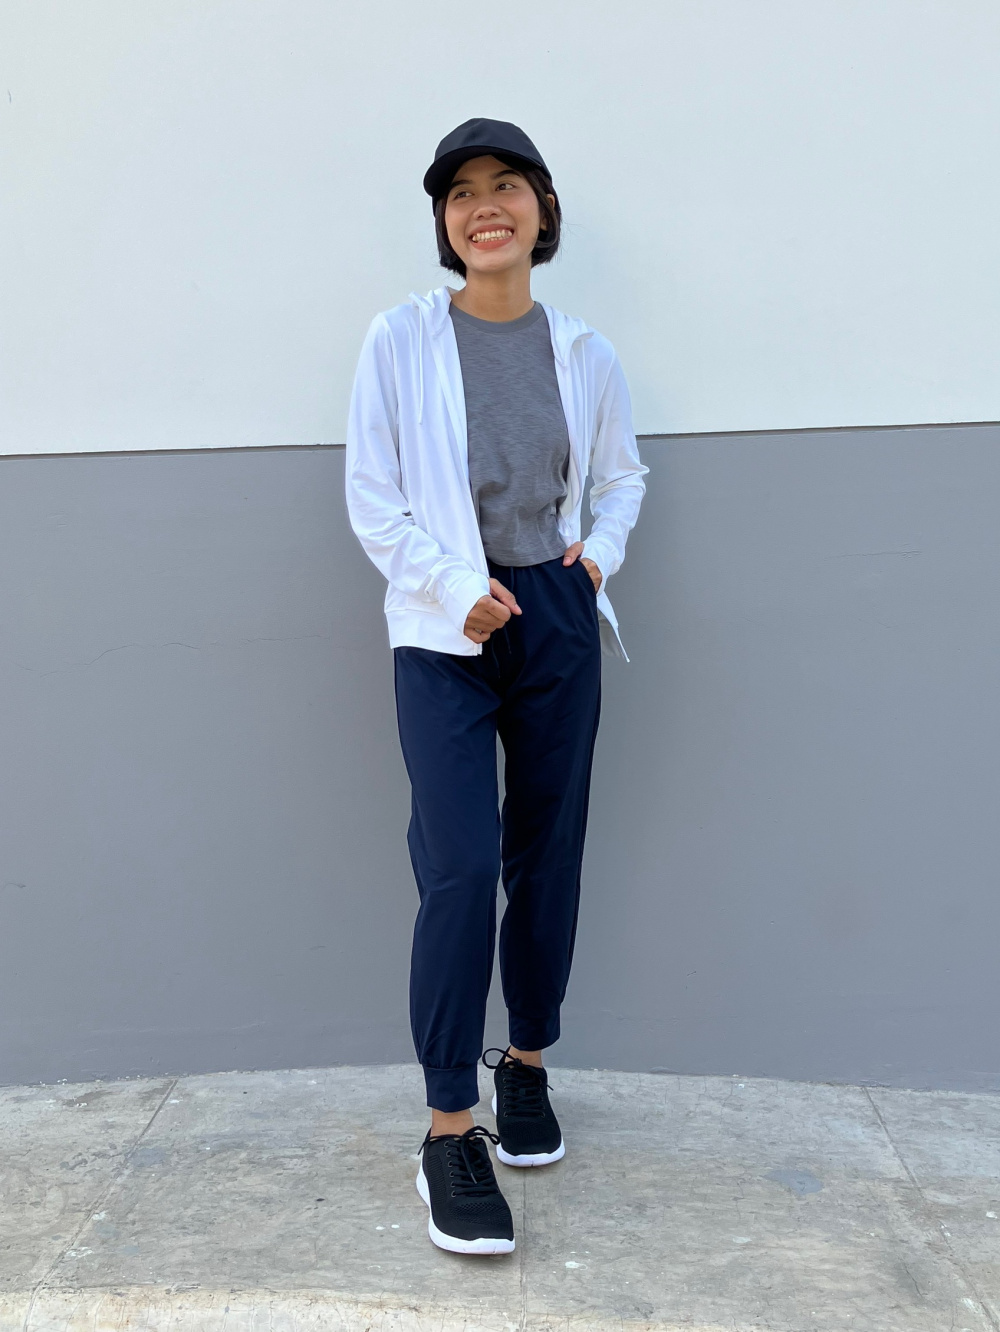 Check styling ideas for「Ultra Stretch AIRism Jogger Pants」